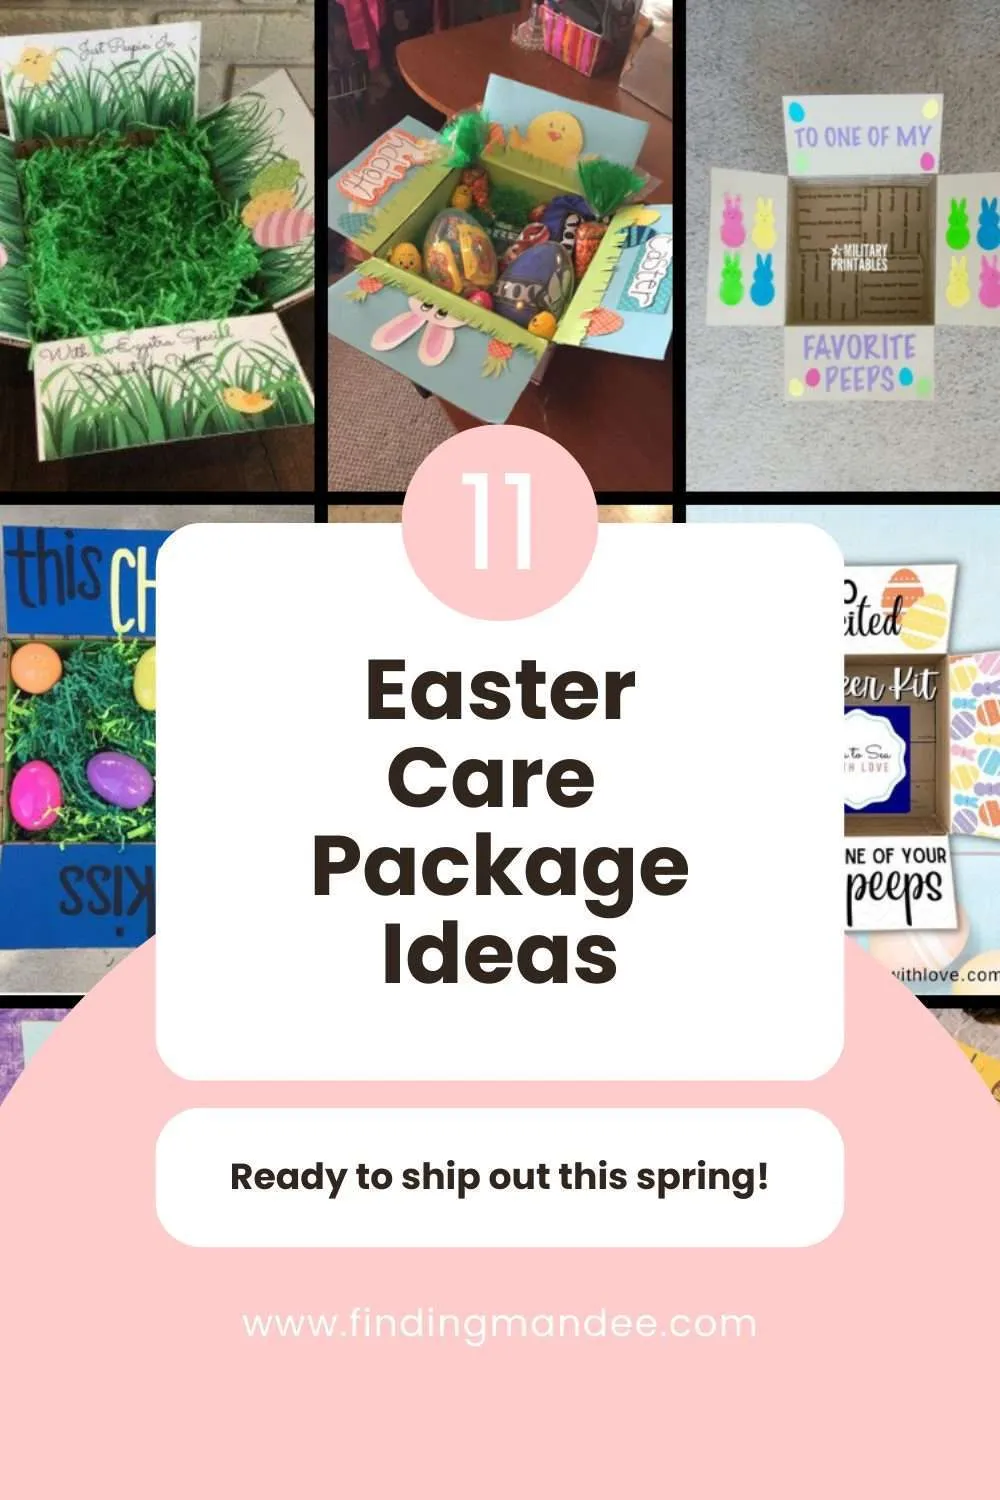 11 Easter Care Packages Ideas | Finding Mandee